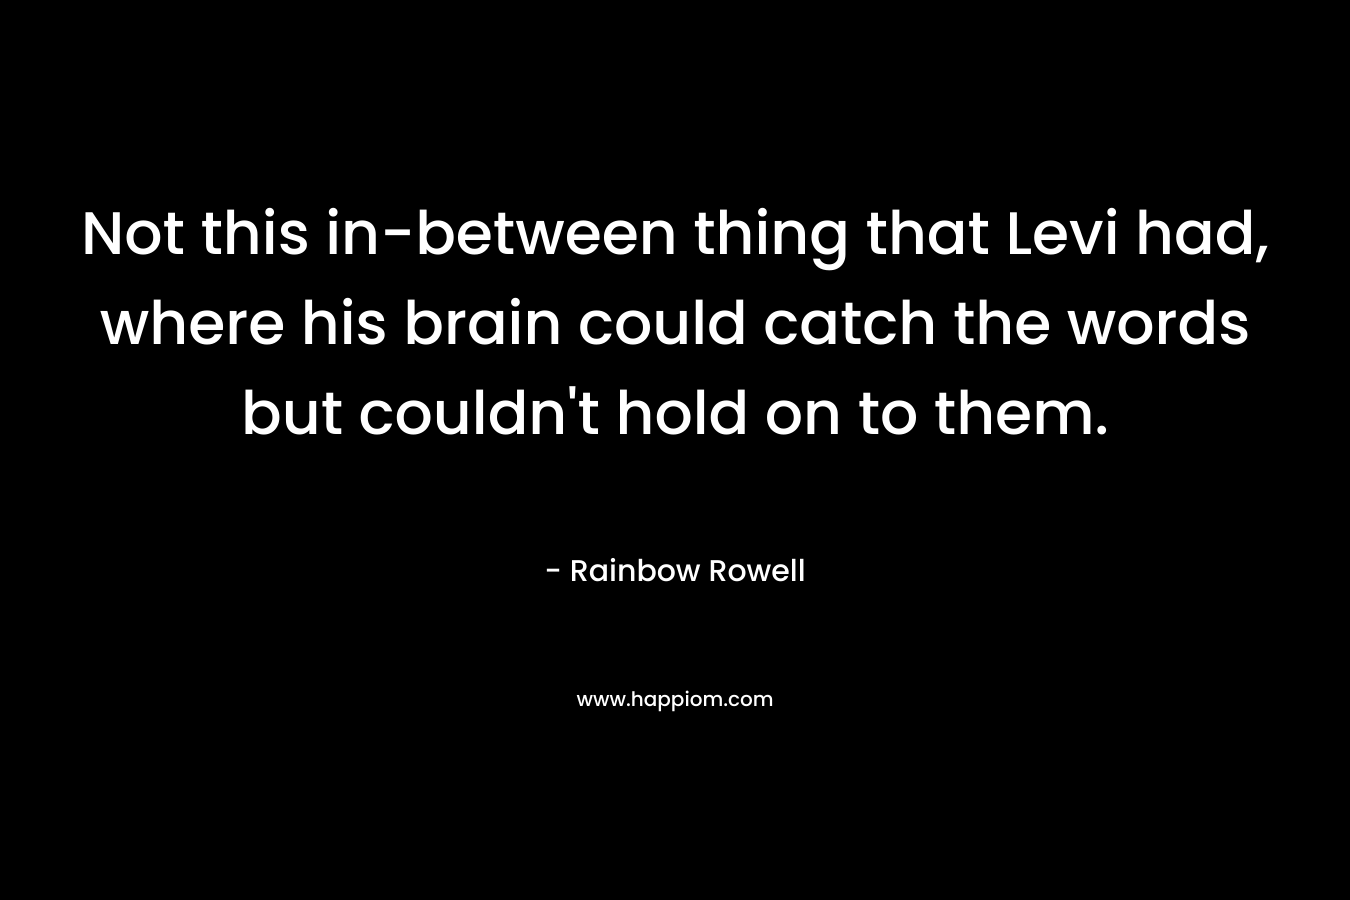 Not this in-between thing that Levi had, where his brain could catch the words but couldn’t hold on to them. – Rainbow Rowell